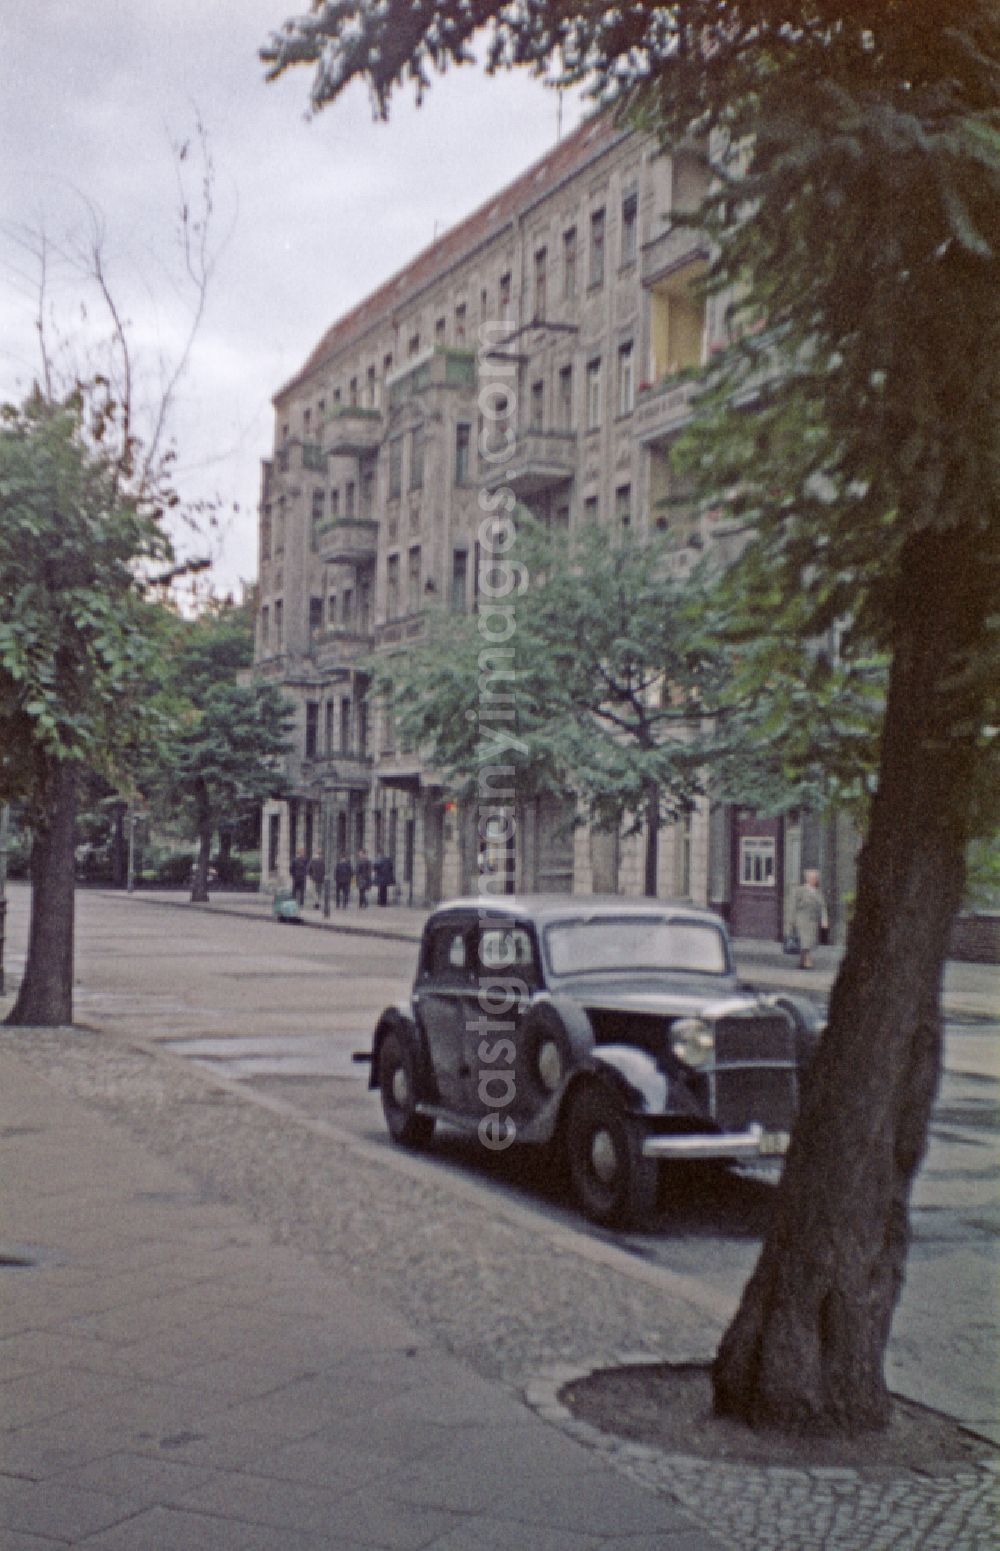 GDR image archive: Berlin - Passenger Cars - Motor Vehicles in Road Traffic Mercedes Benz W136 17